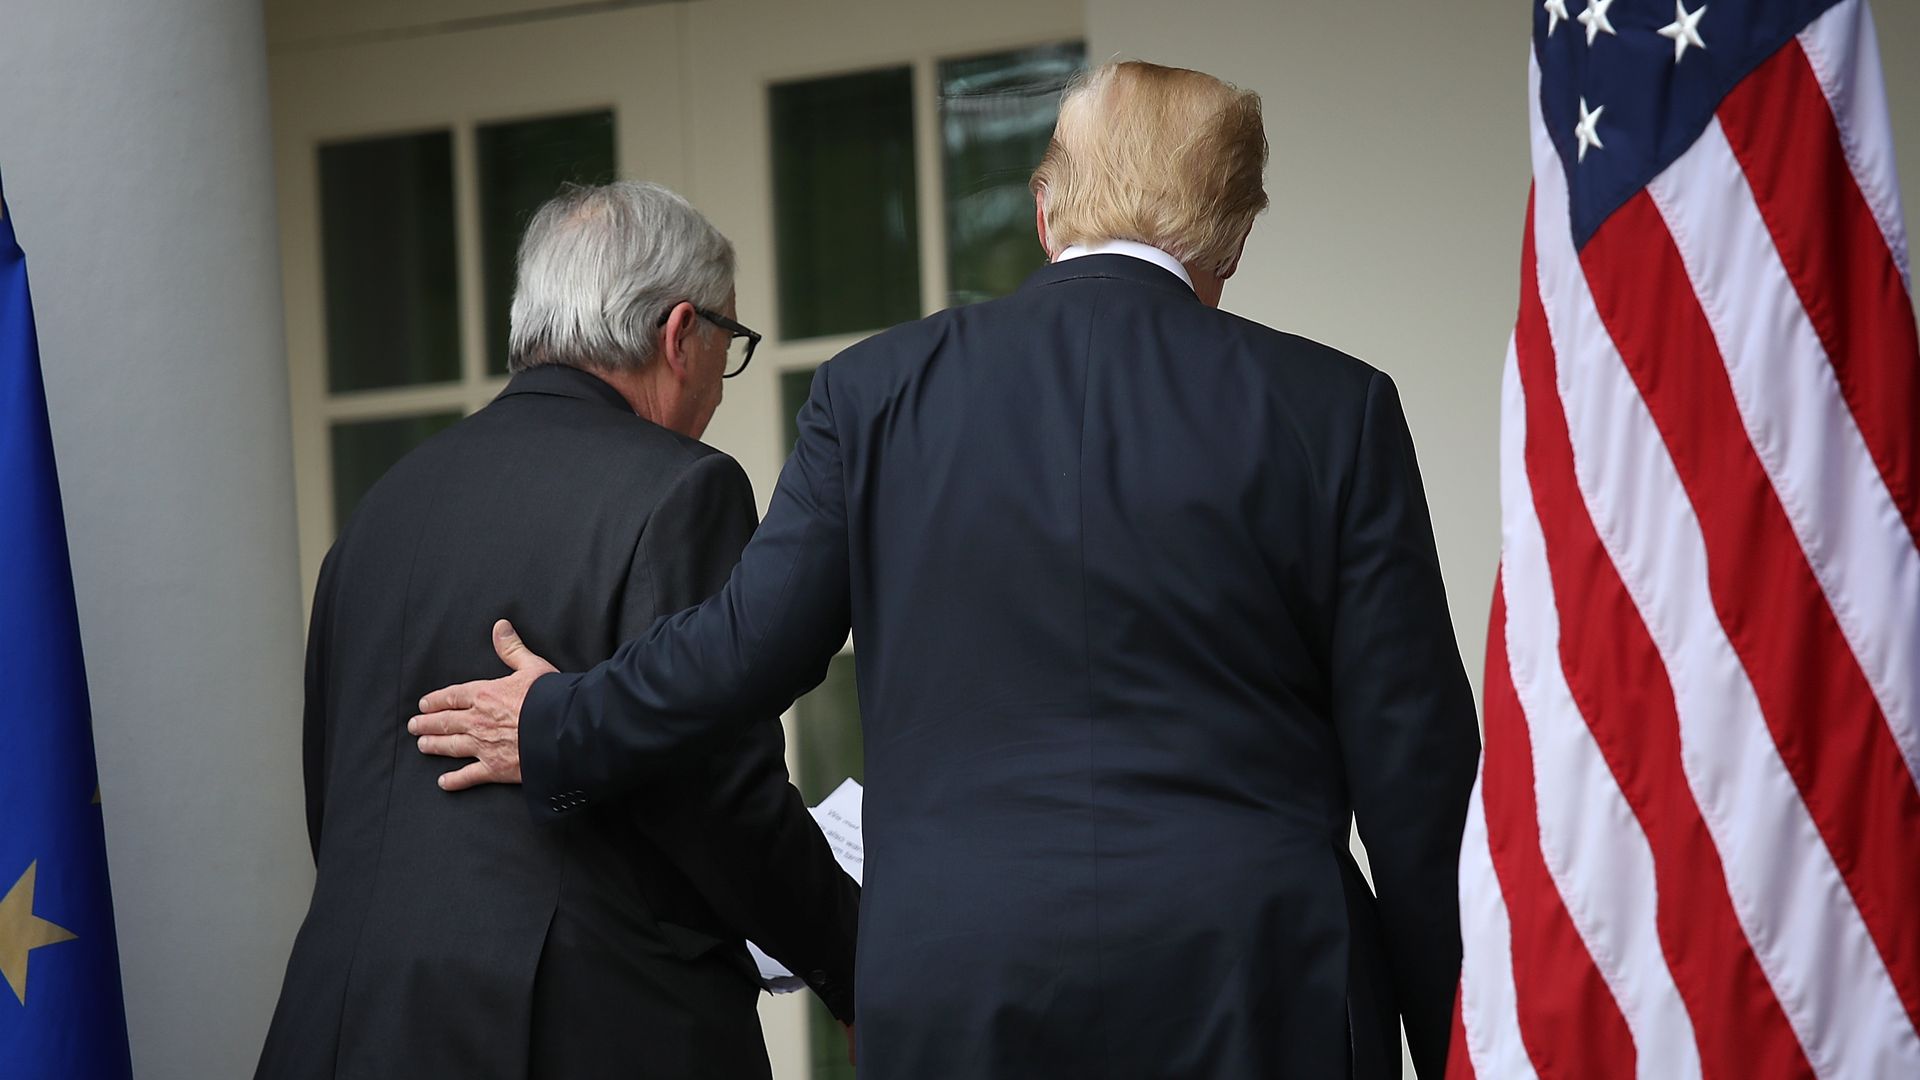 Trump and Juncker walk out of the Rose Garden